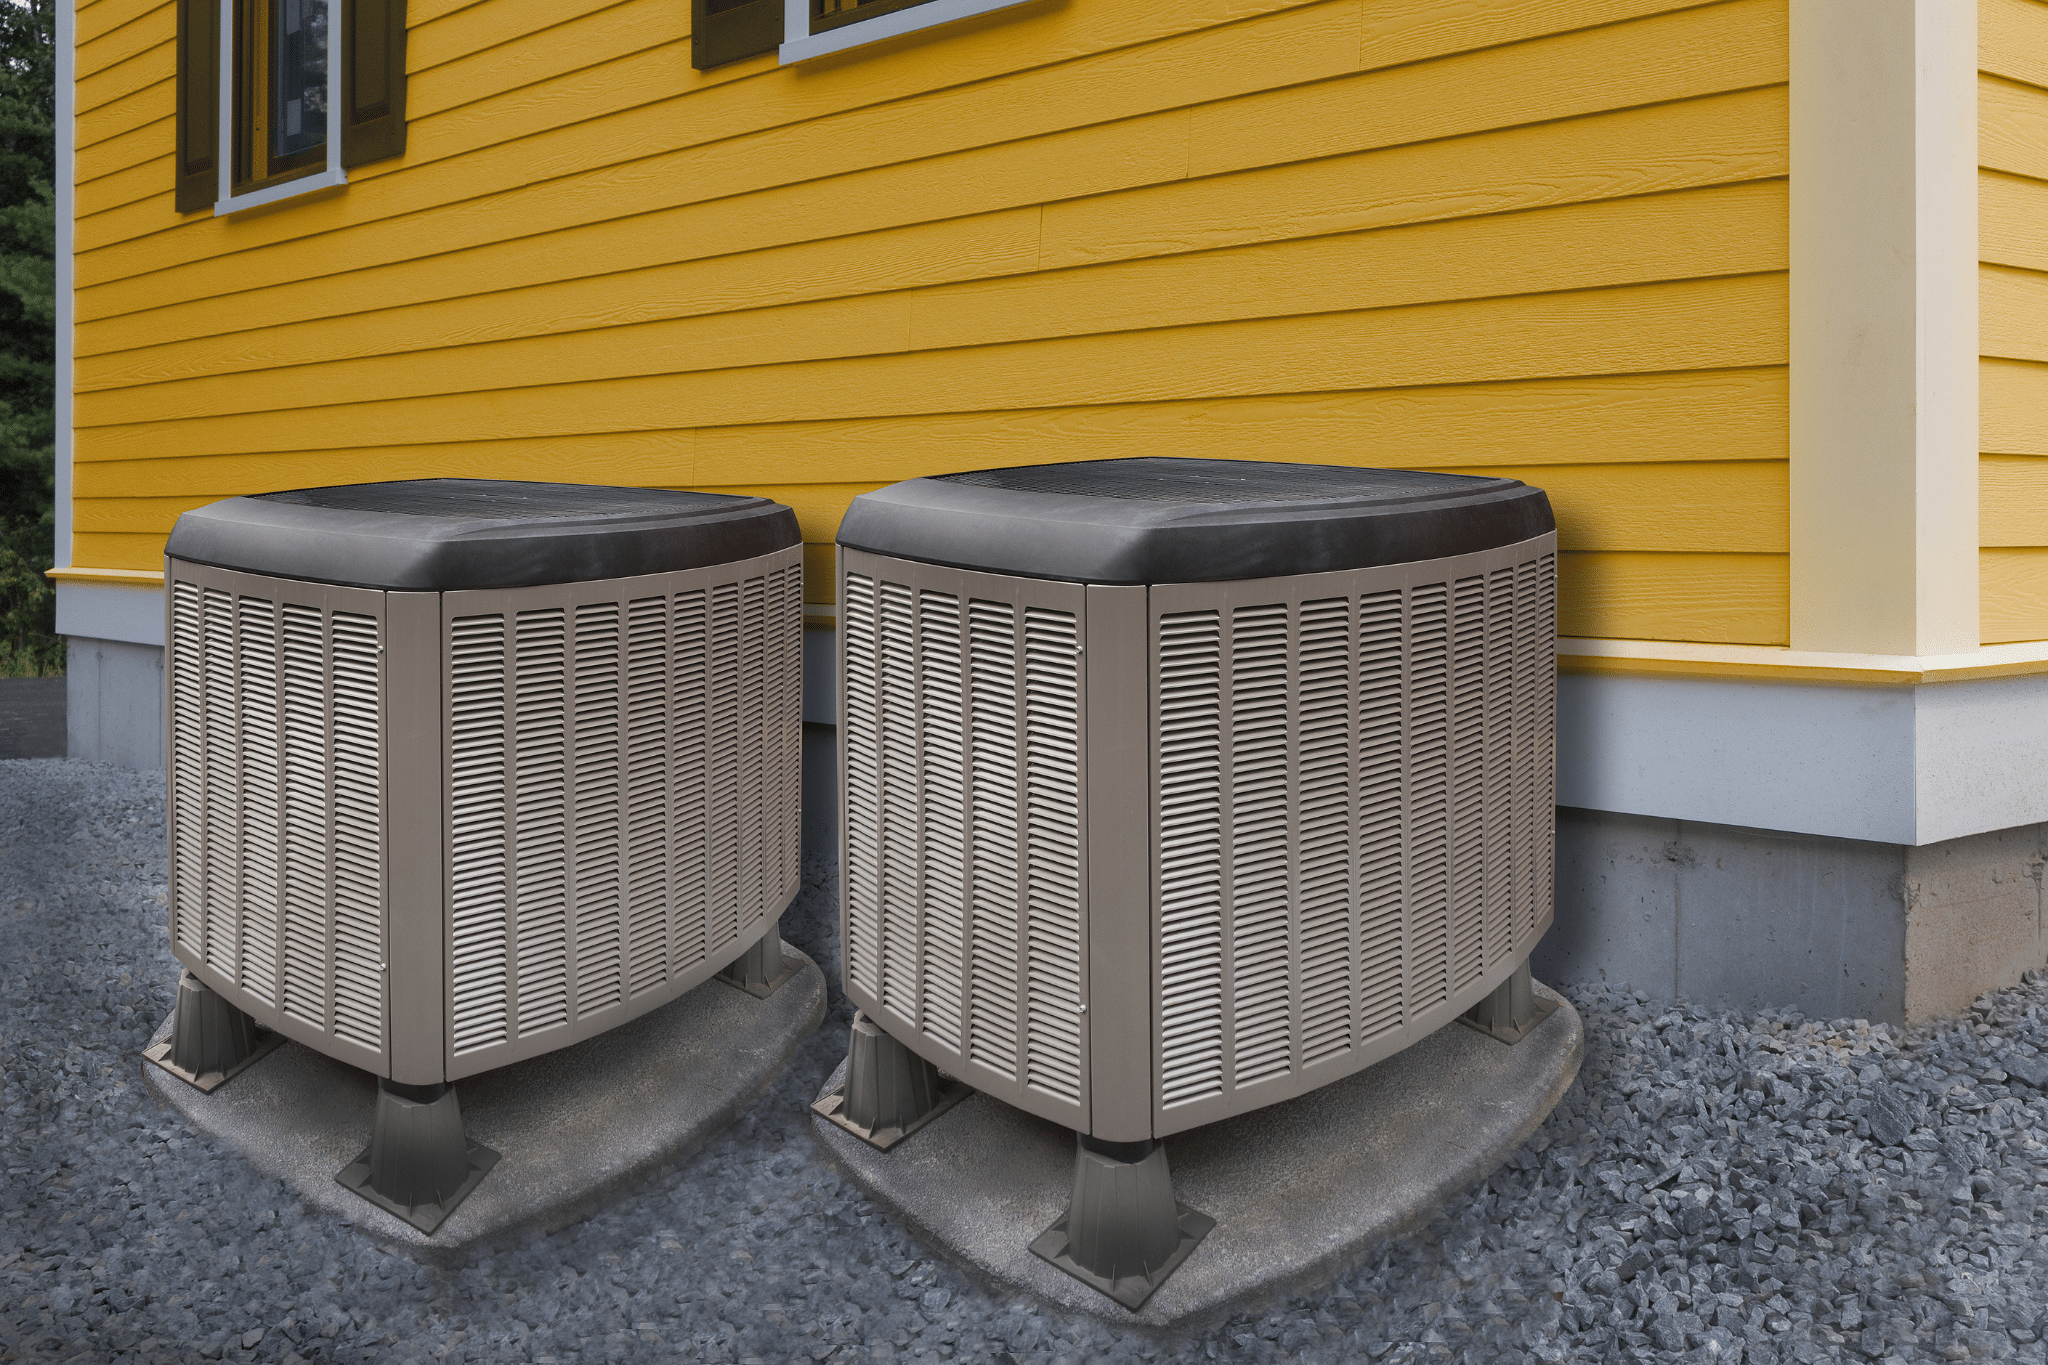 2 outdoor residential HVAC units